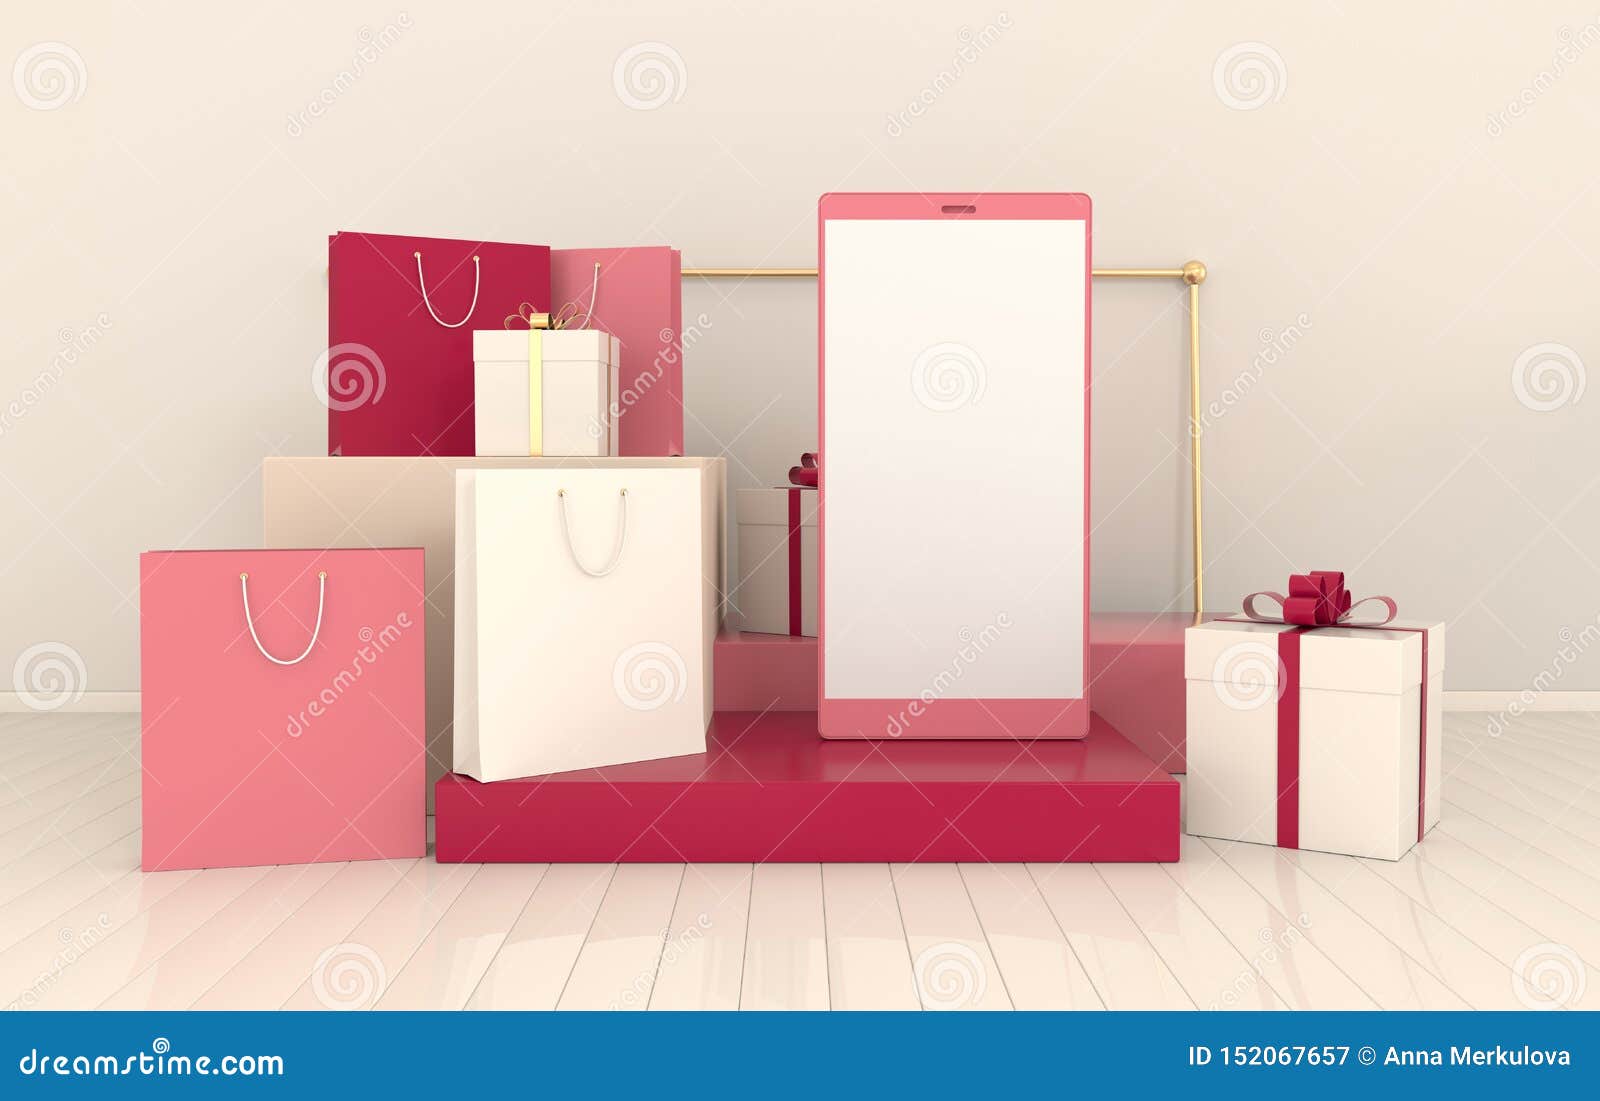 Download Smartphone, Gift Box, Shopping Bag Mockup Background In ...